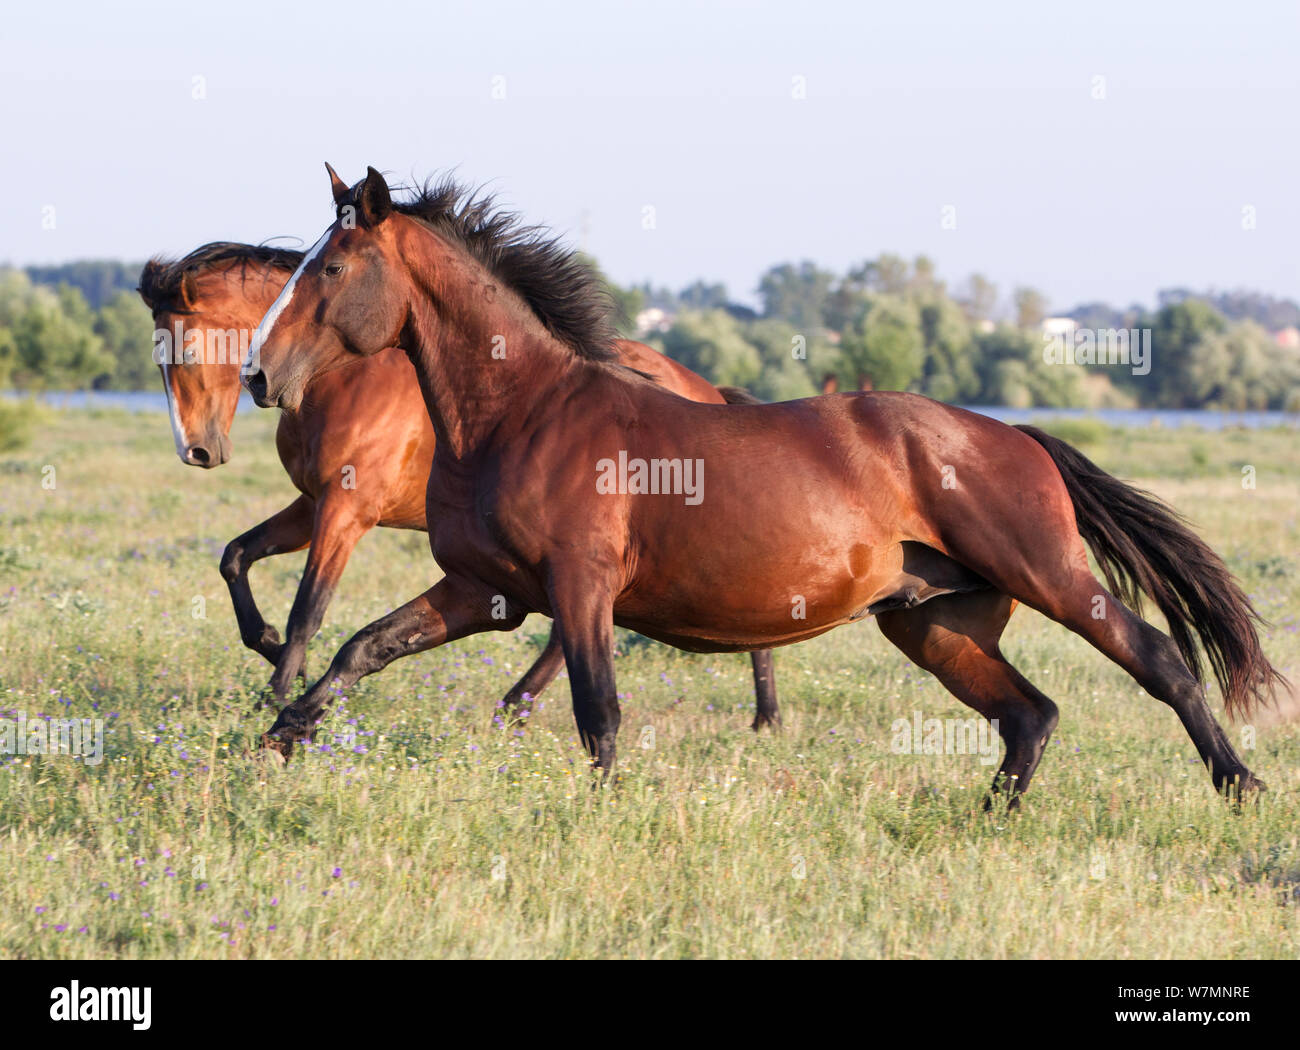 Lusitano horse, two bay horses at stud, Portugal, May 2011 Stock Photo